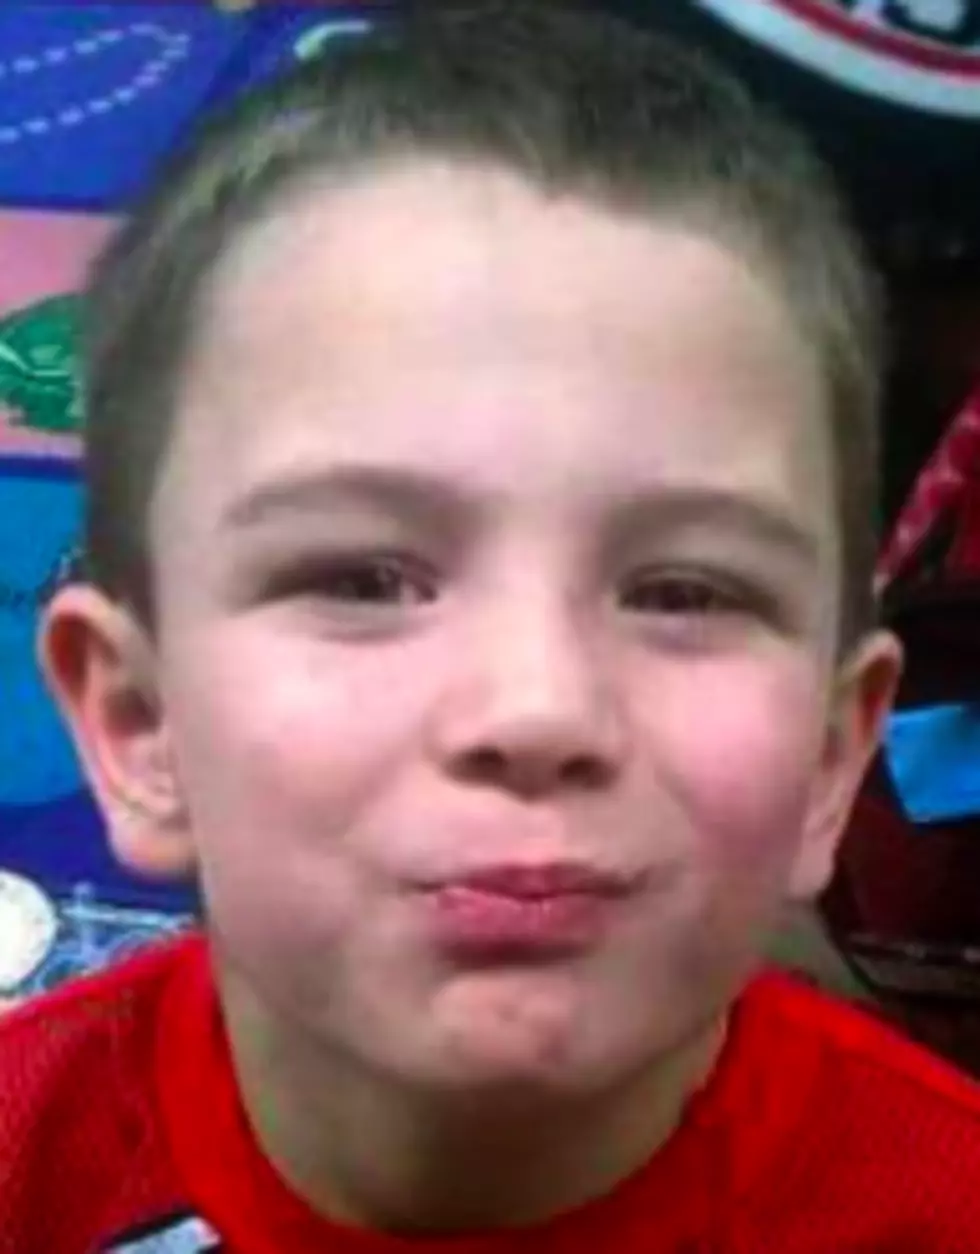 Colorado Authorities Identify Body Of Boy Who Was The Subject Of AMBER Alert